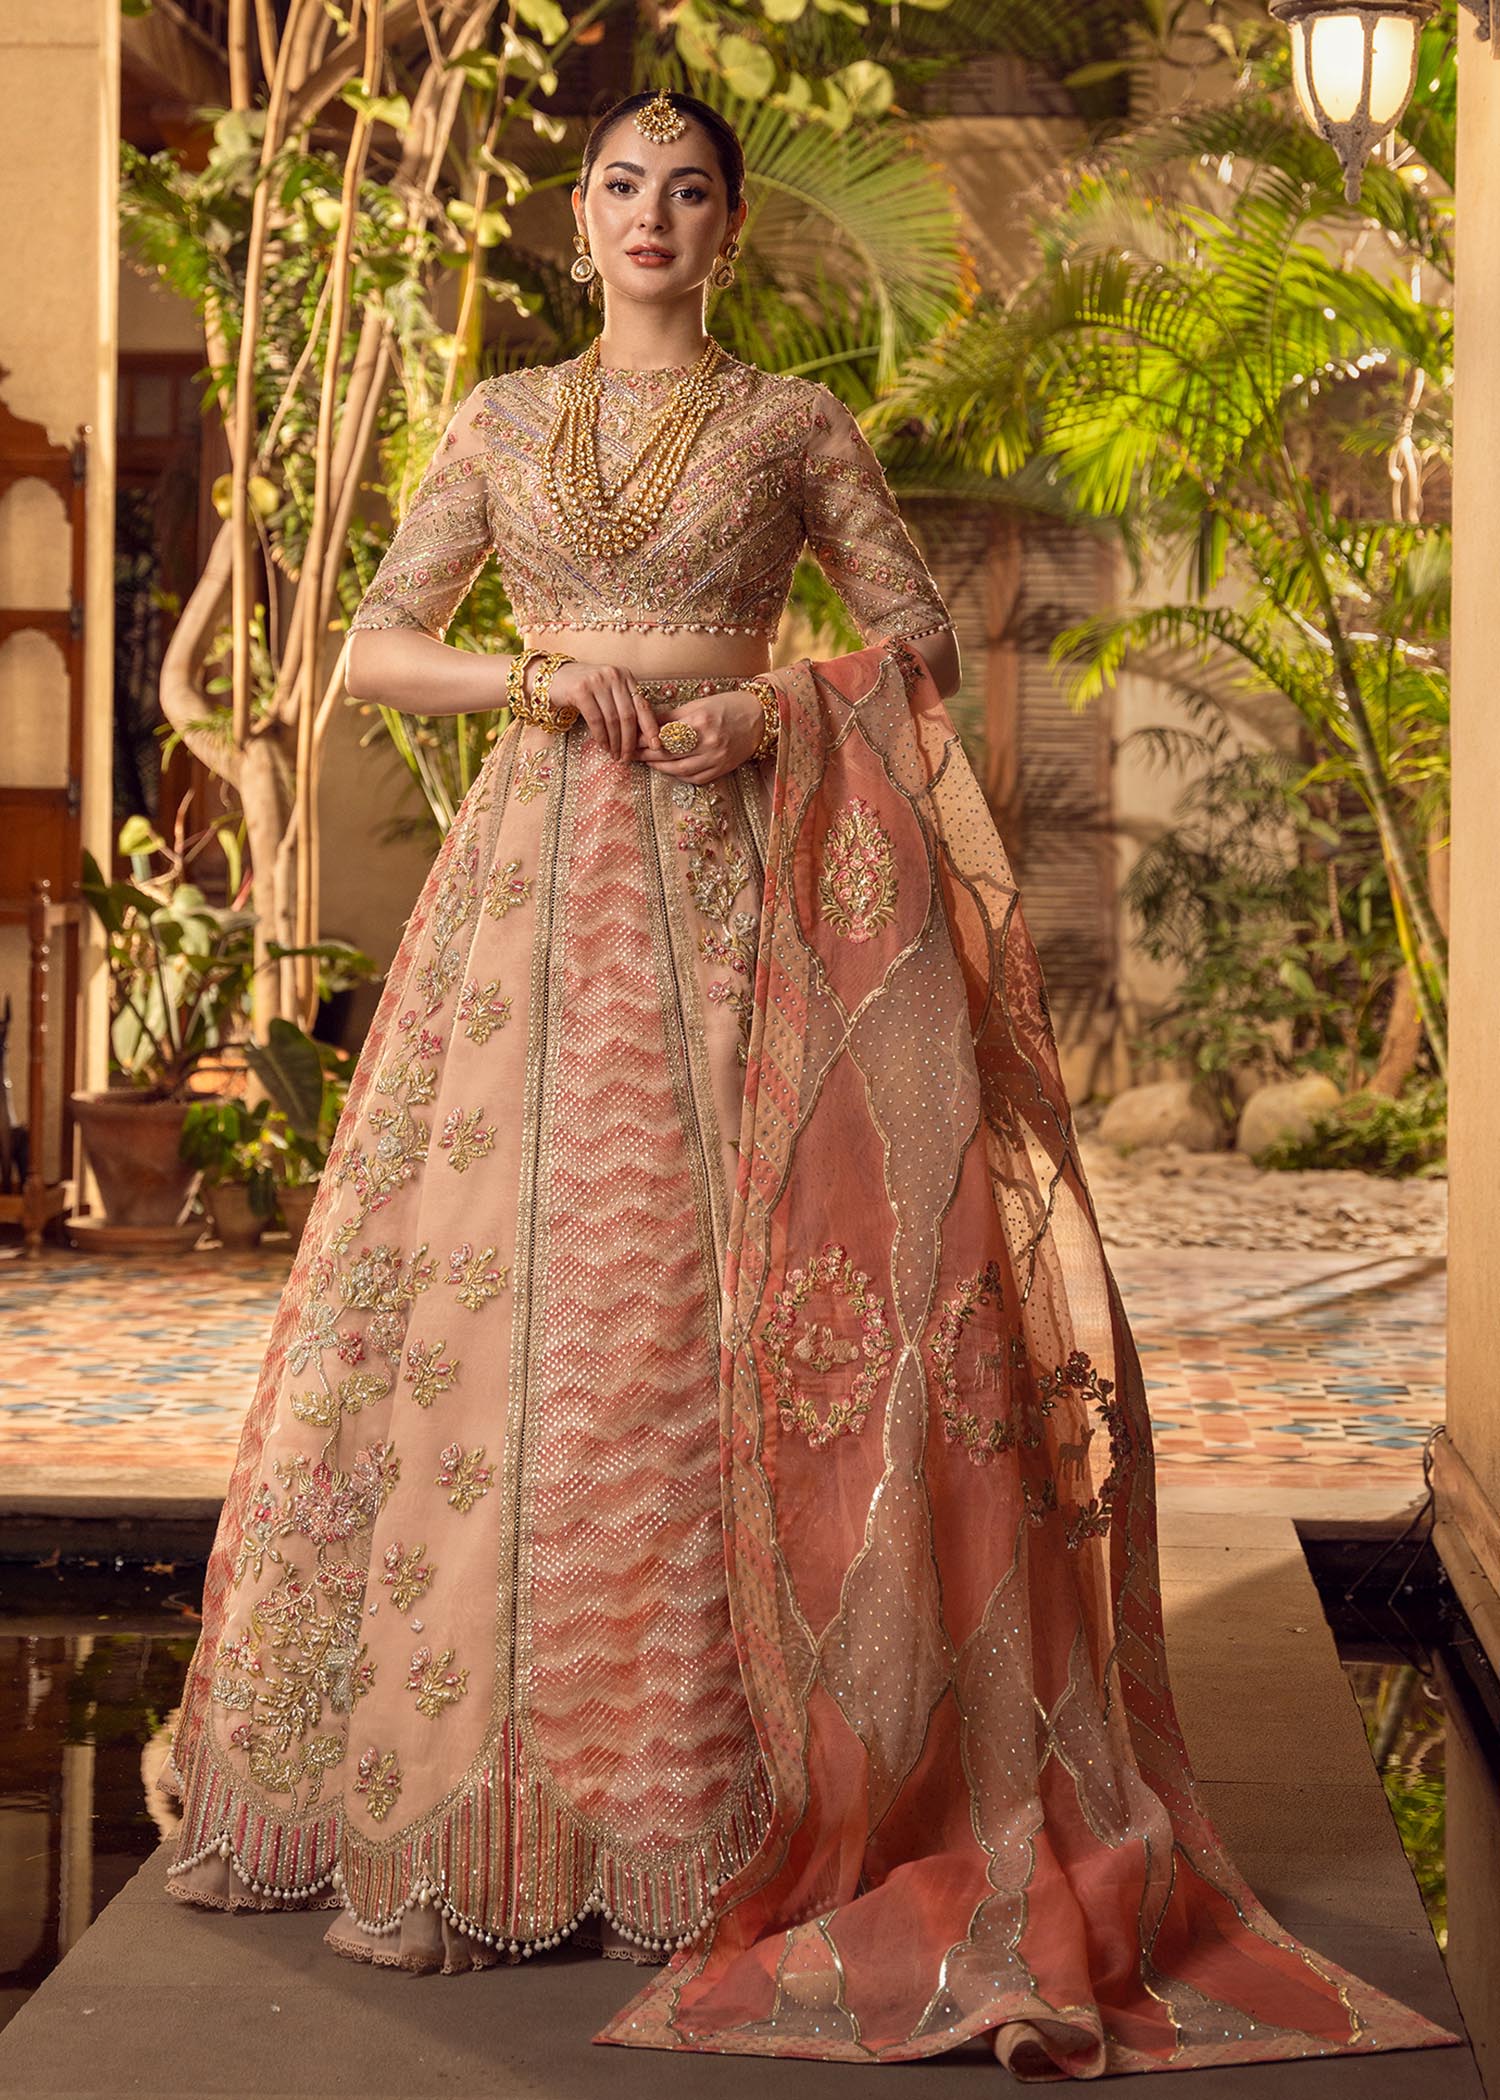 Buy HSY | HSY House of Brides | HSY House of Wedding Groom | HSY Wedding  Dresses Online | HSY Bridals | HSY Bridesmaid Dresses